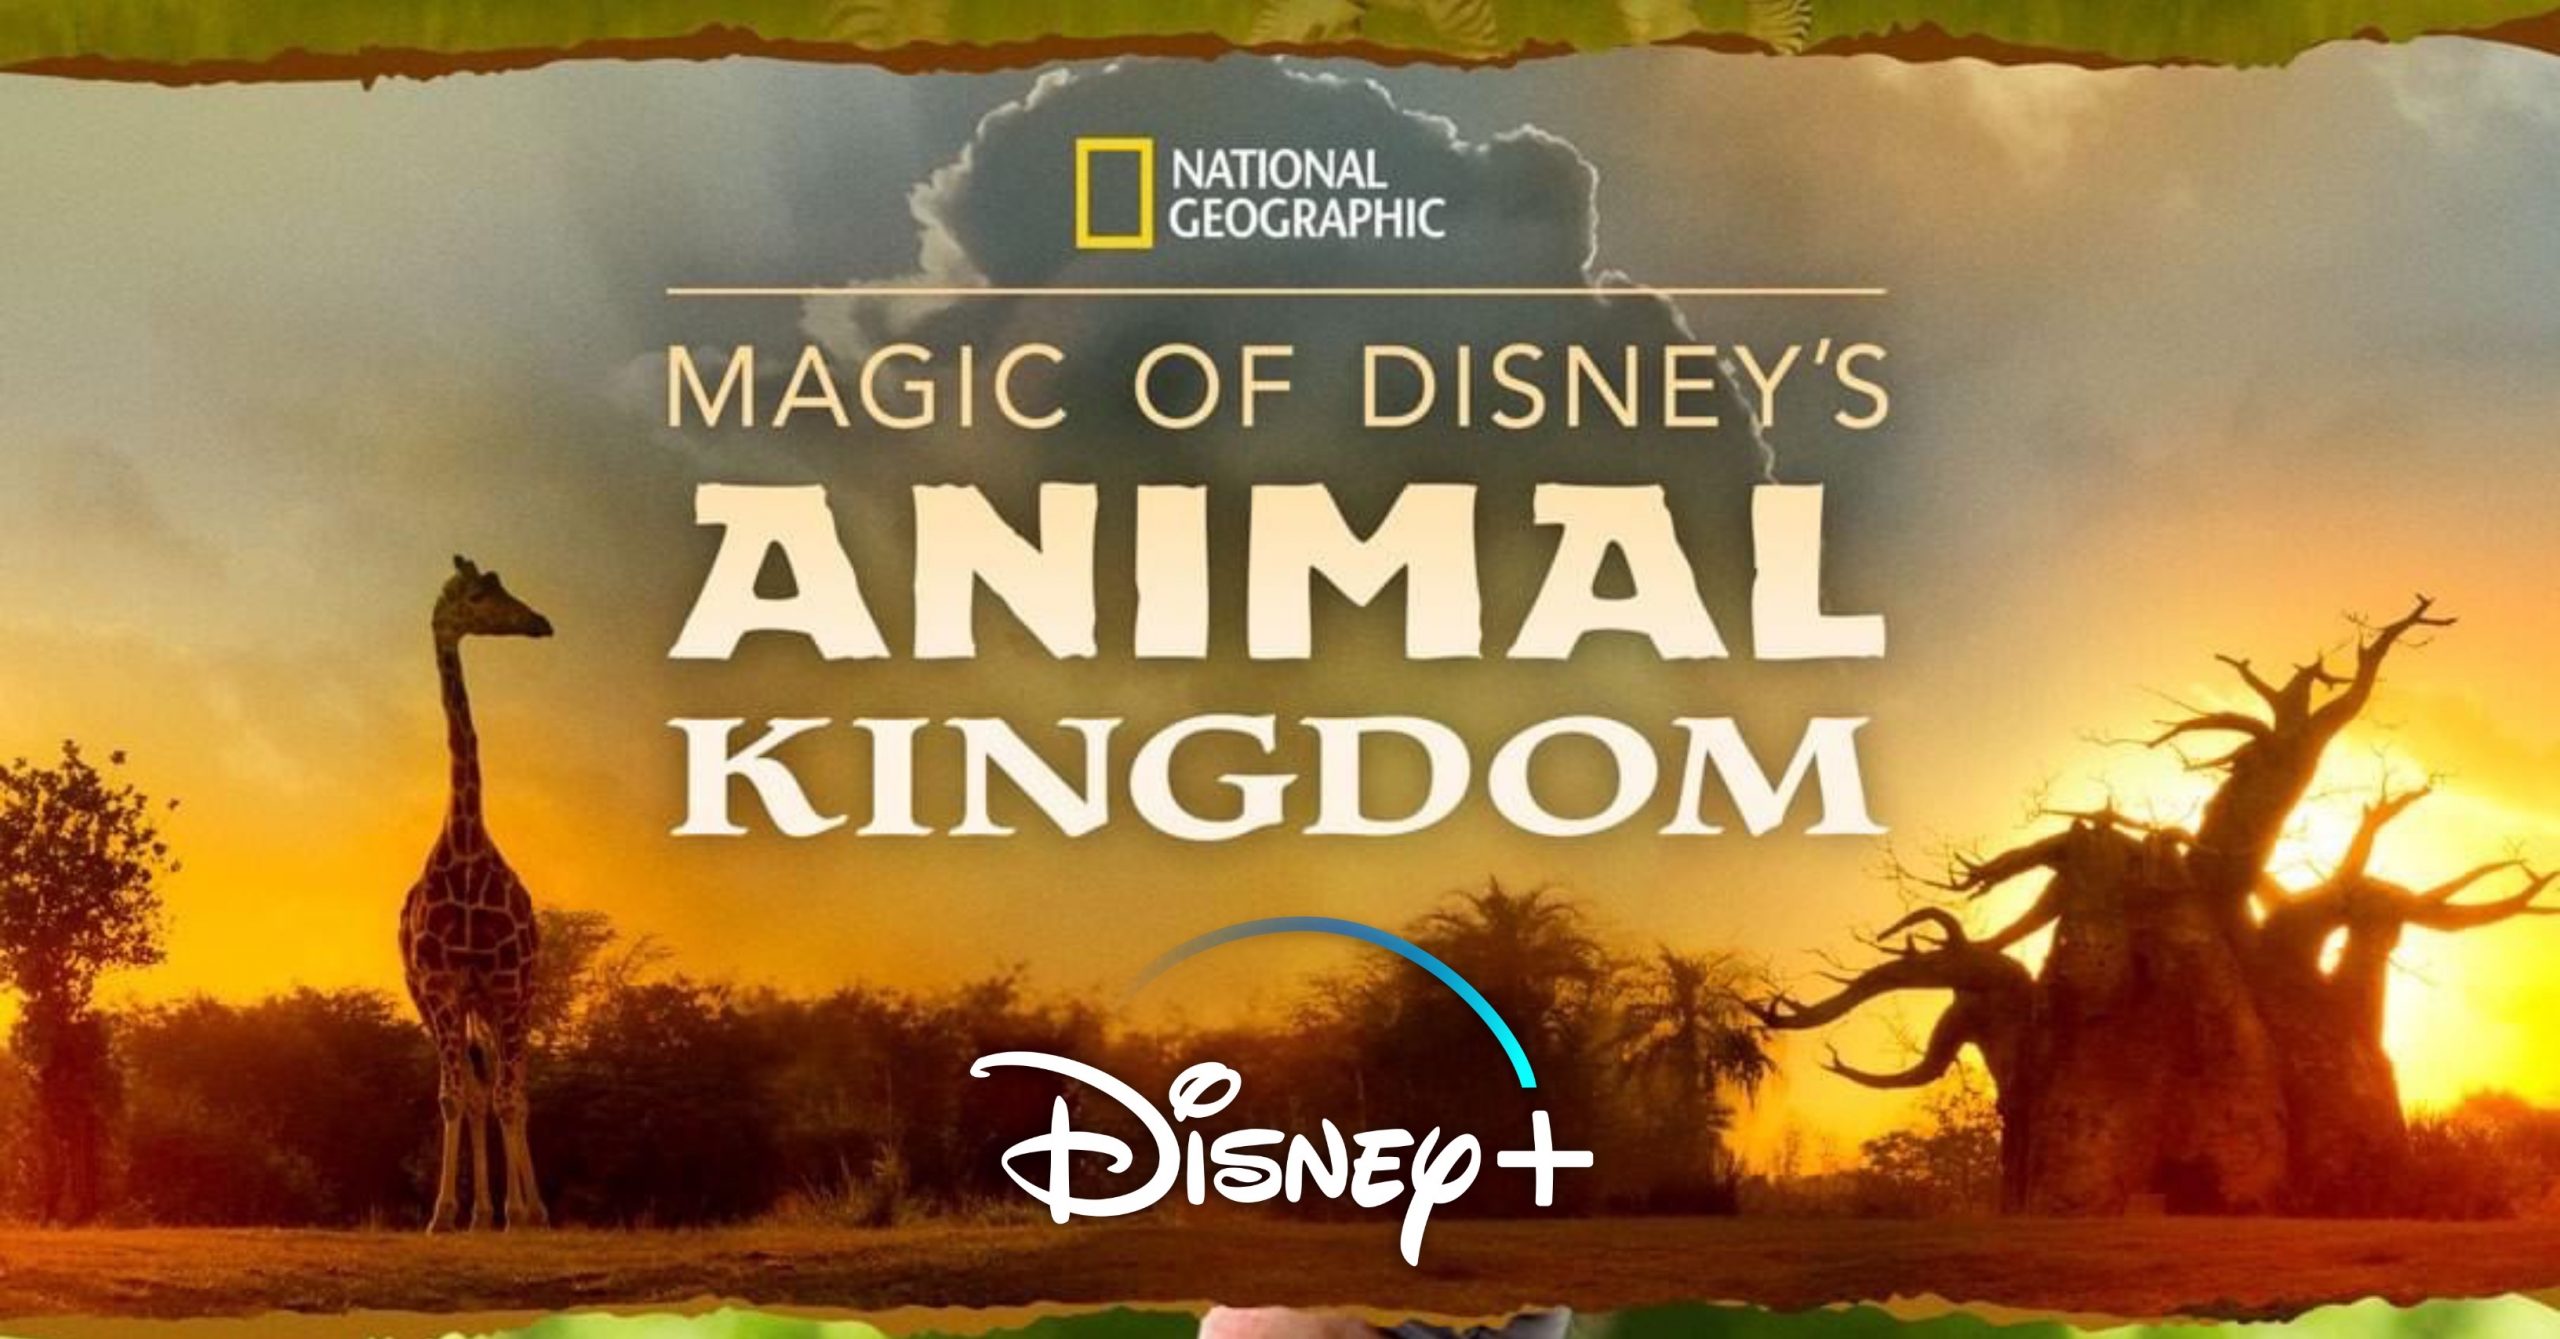 ‘Magic of Disney’s Animal Kingdom’ from National Geographic to Premiere on Disney+ This Fall